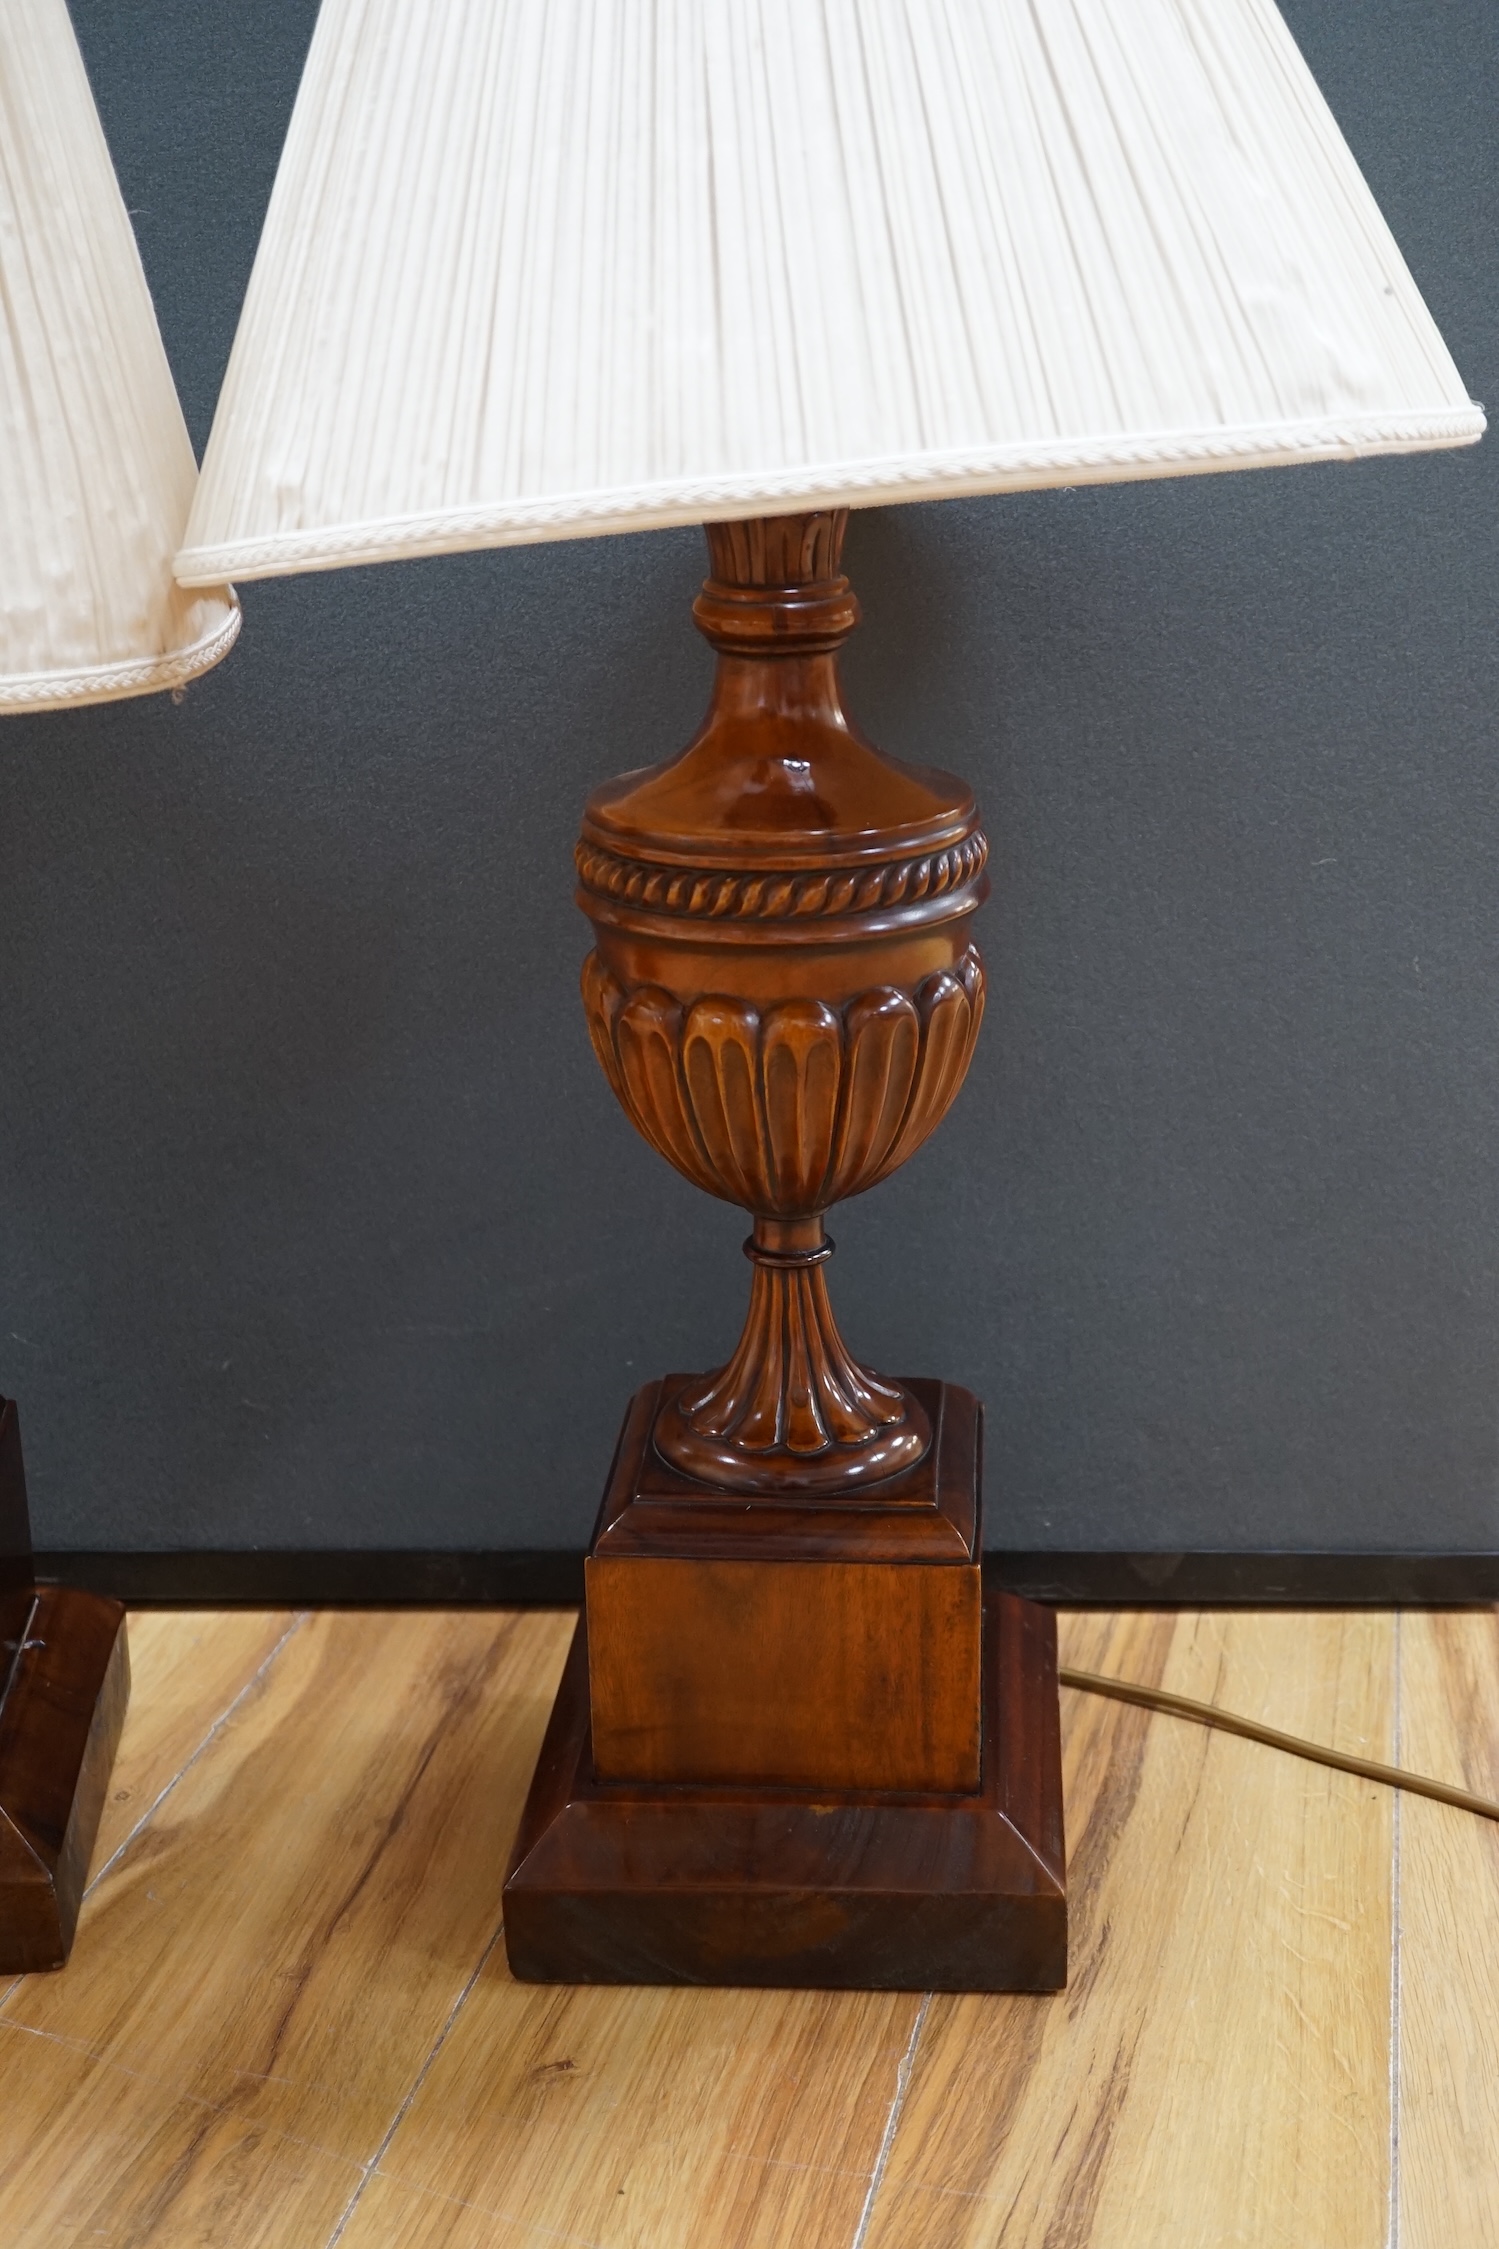 A pair of George III style mahogany carved urn table lamps with shades, 74cm high overall